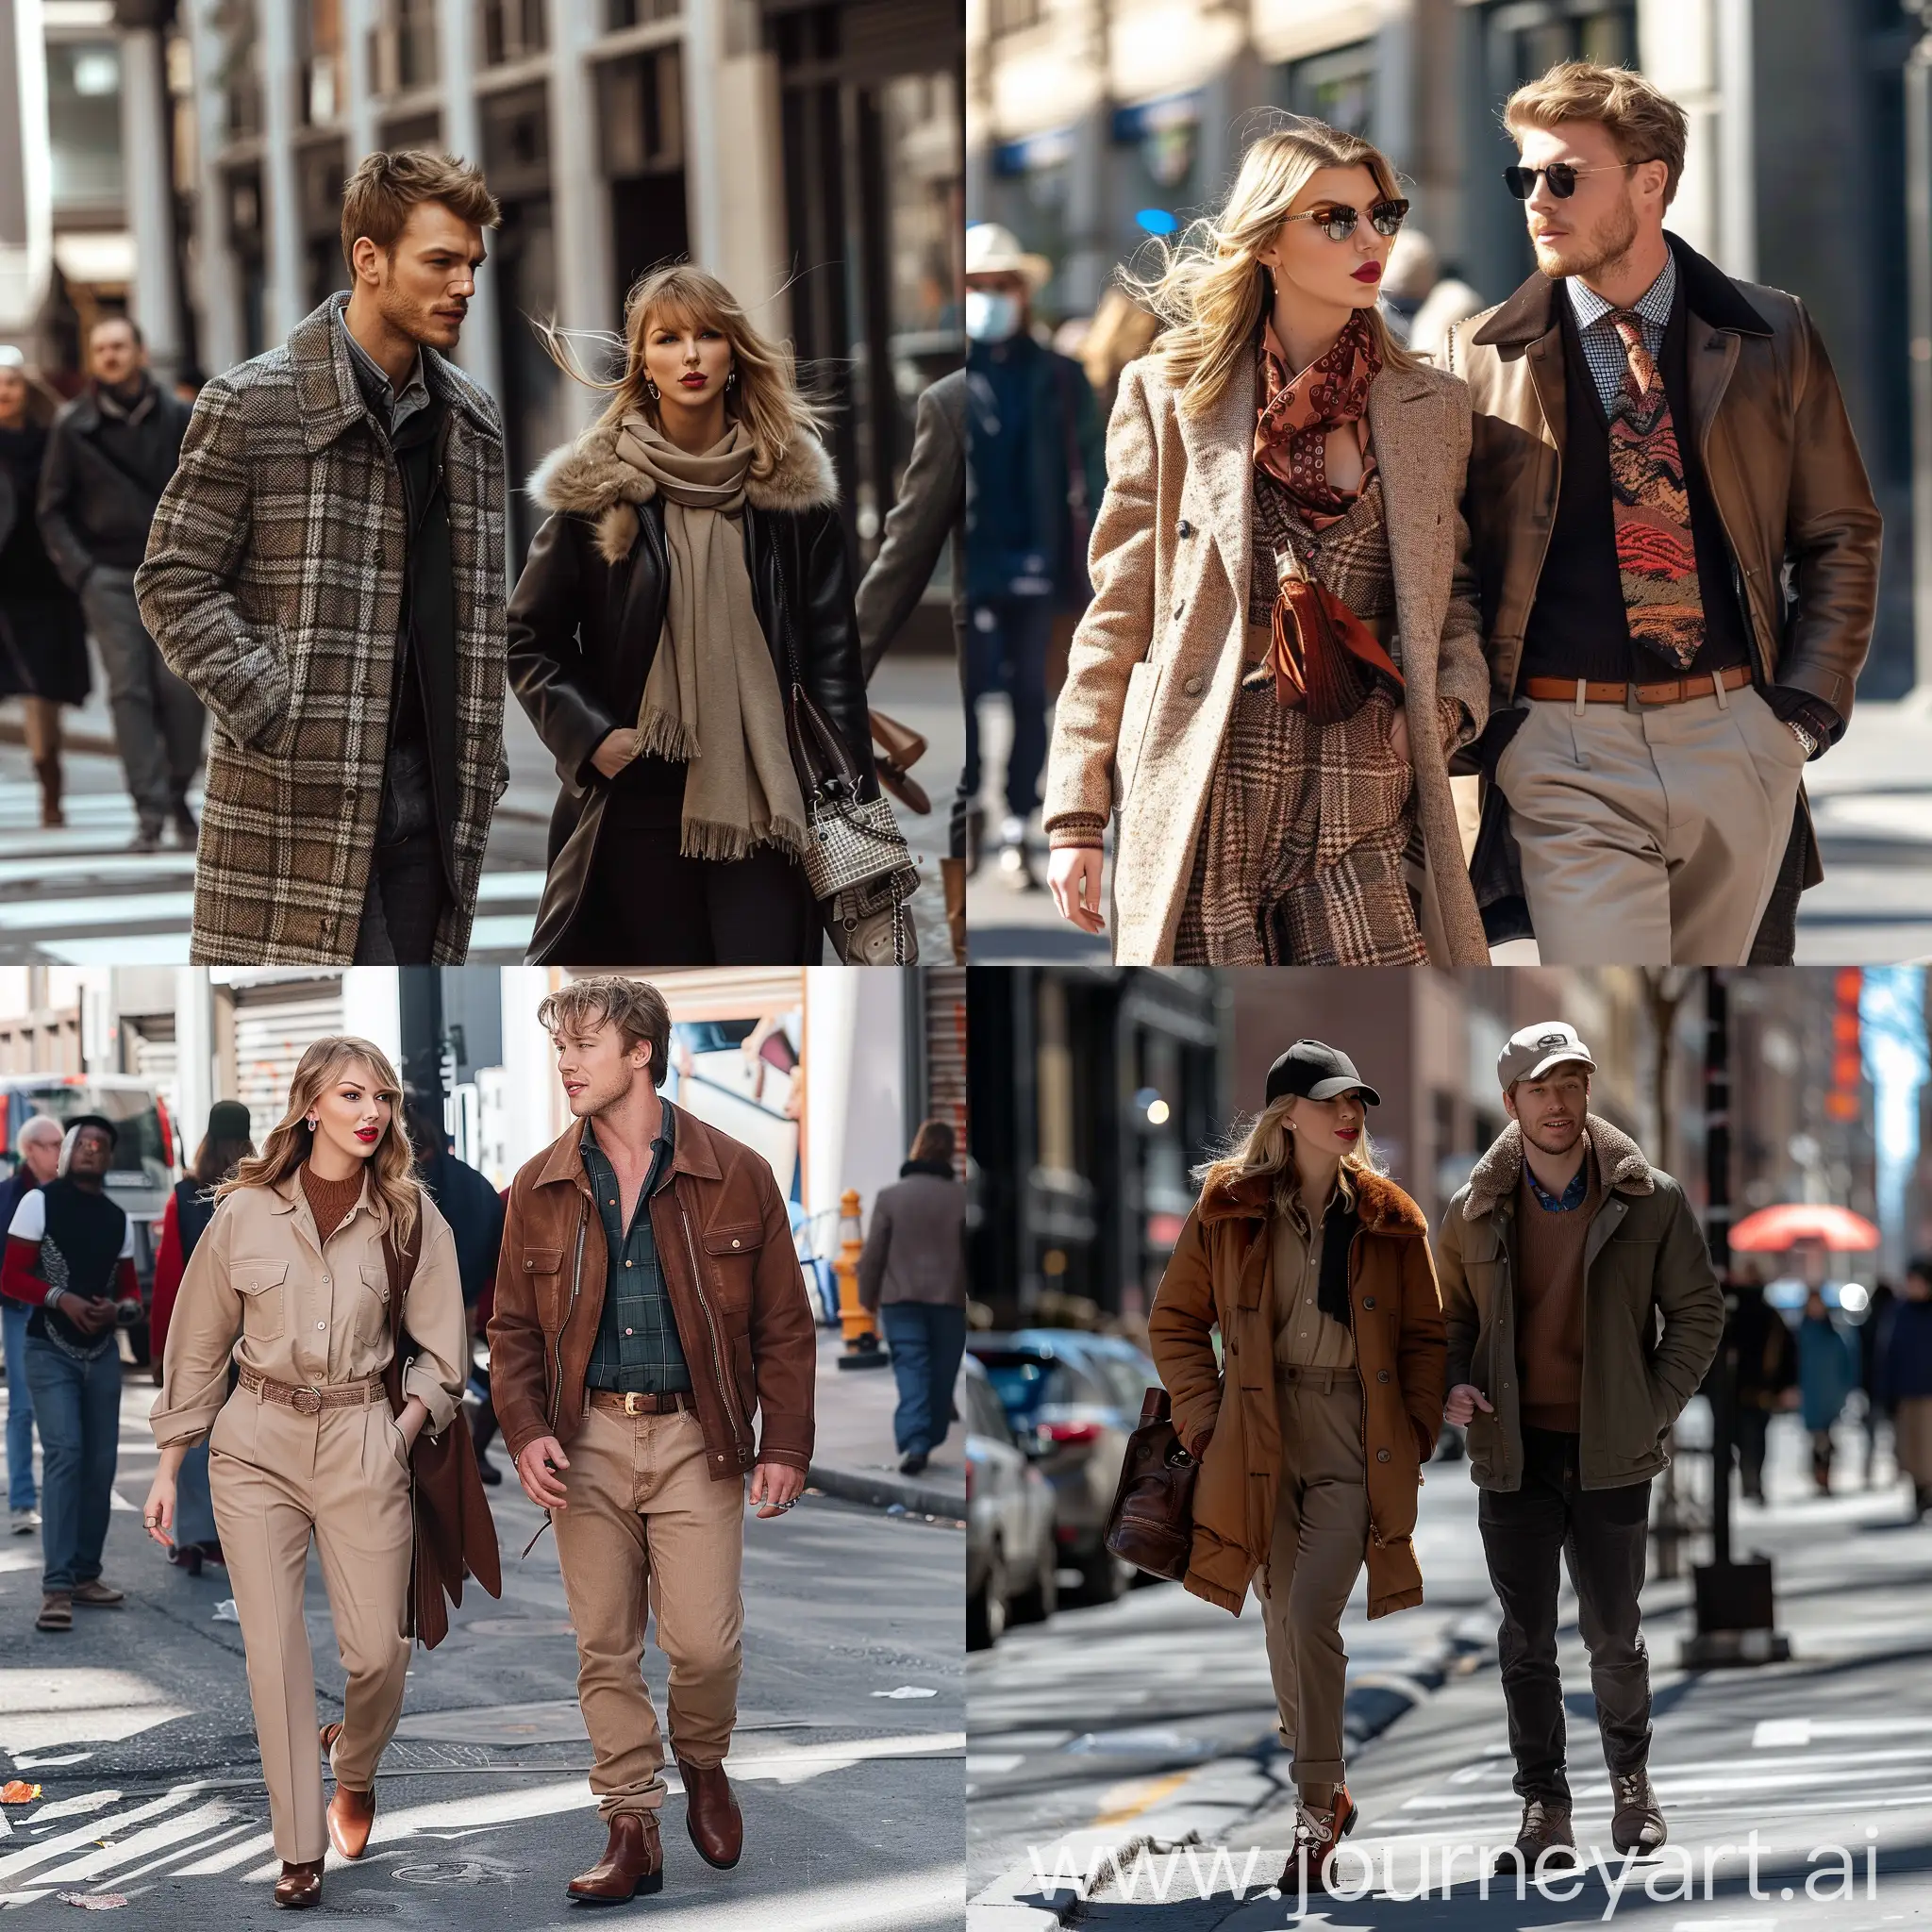 Taylor-Swift-and-Jamie-Bower-Campbell-Strolling-Together-on-the-Street